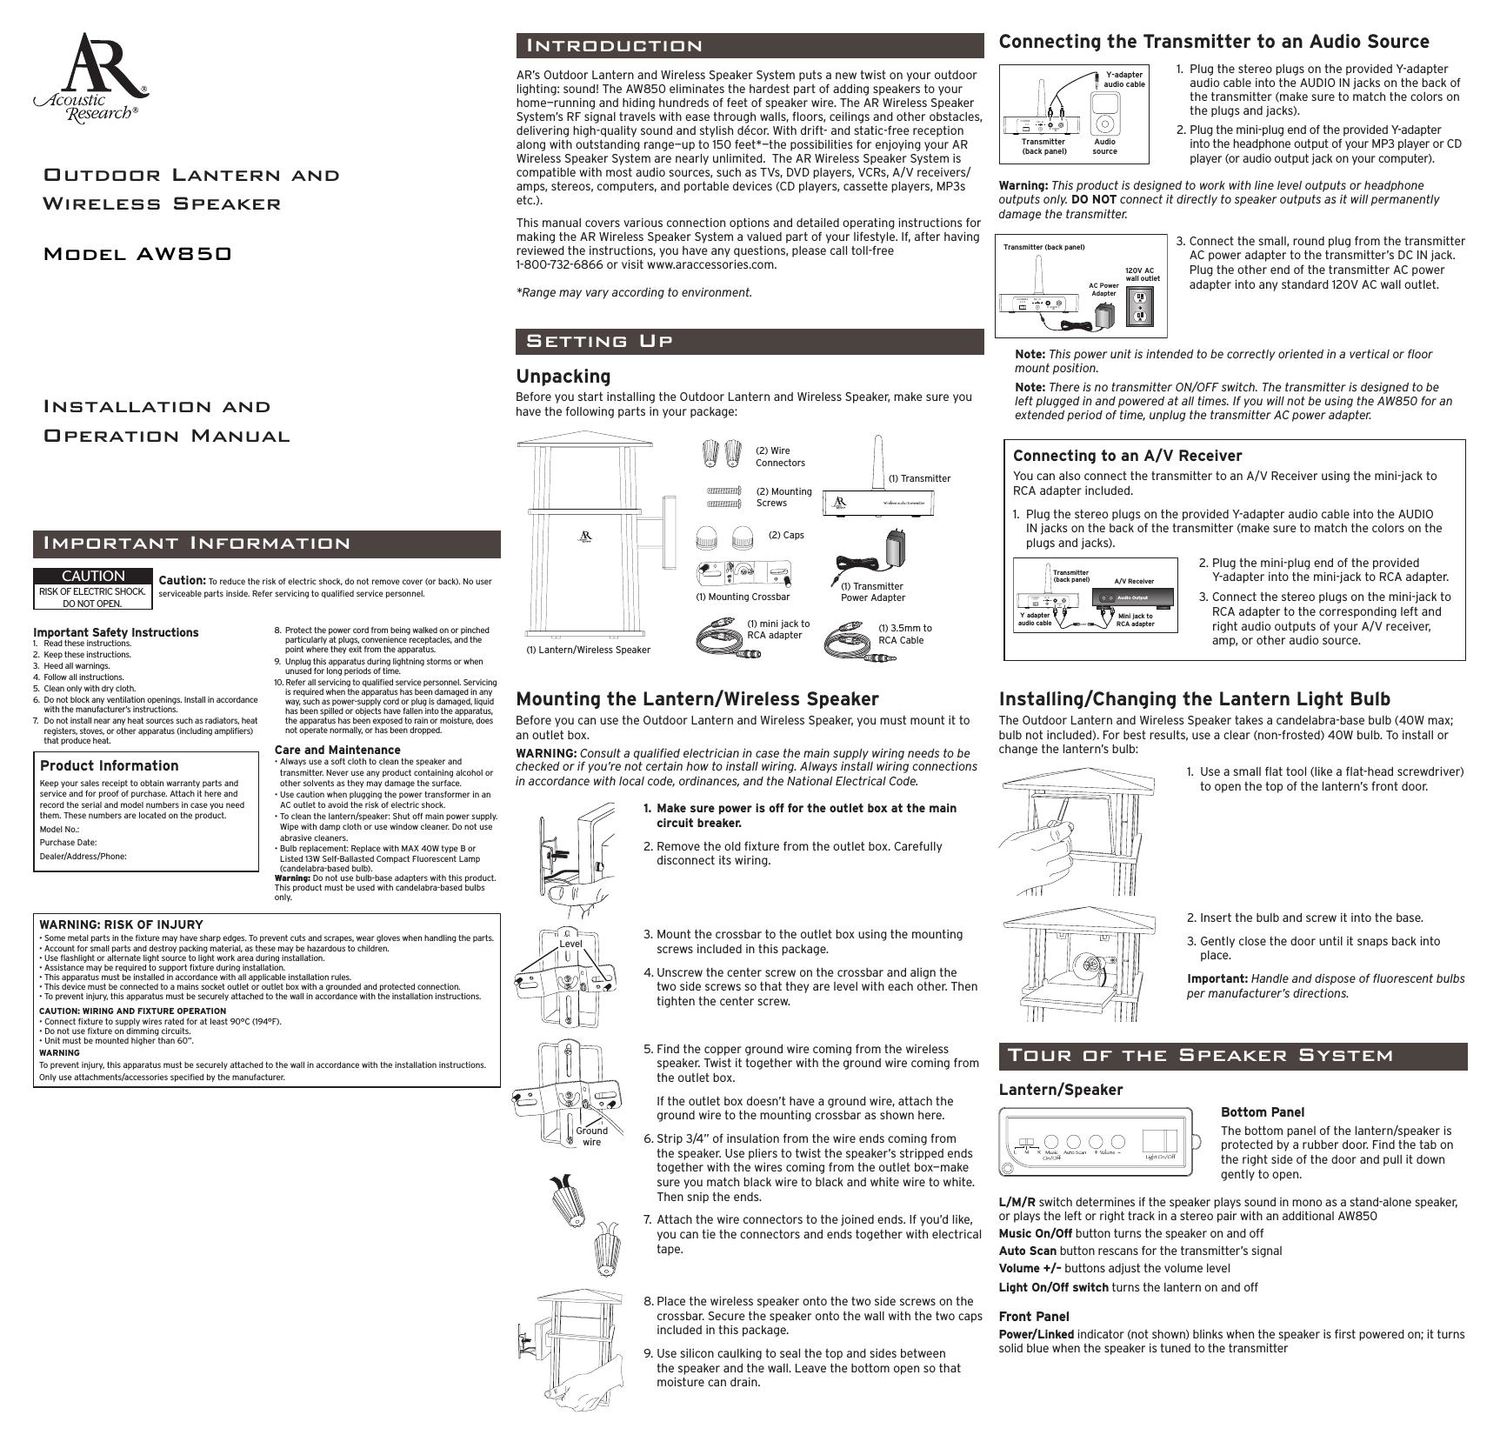 acoustic research AW 850 Owners Manual